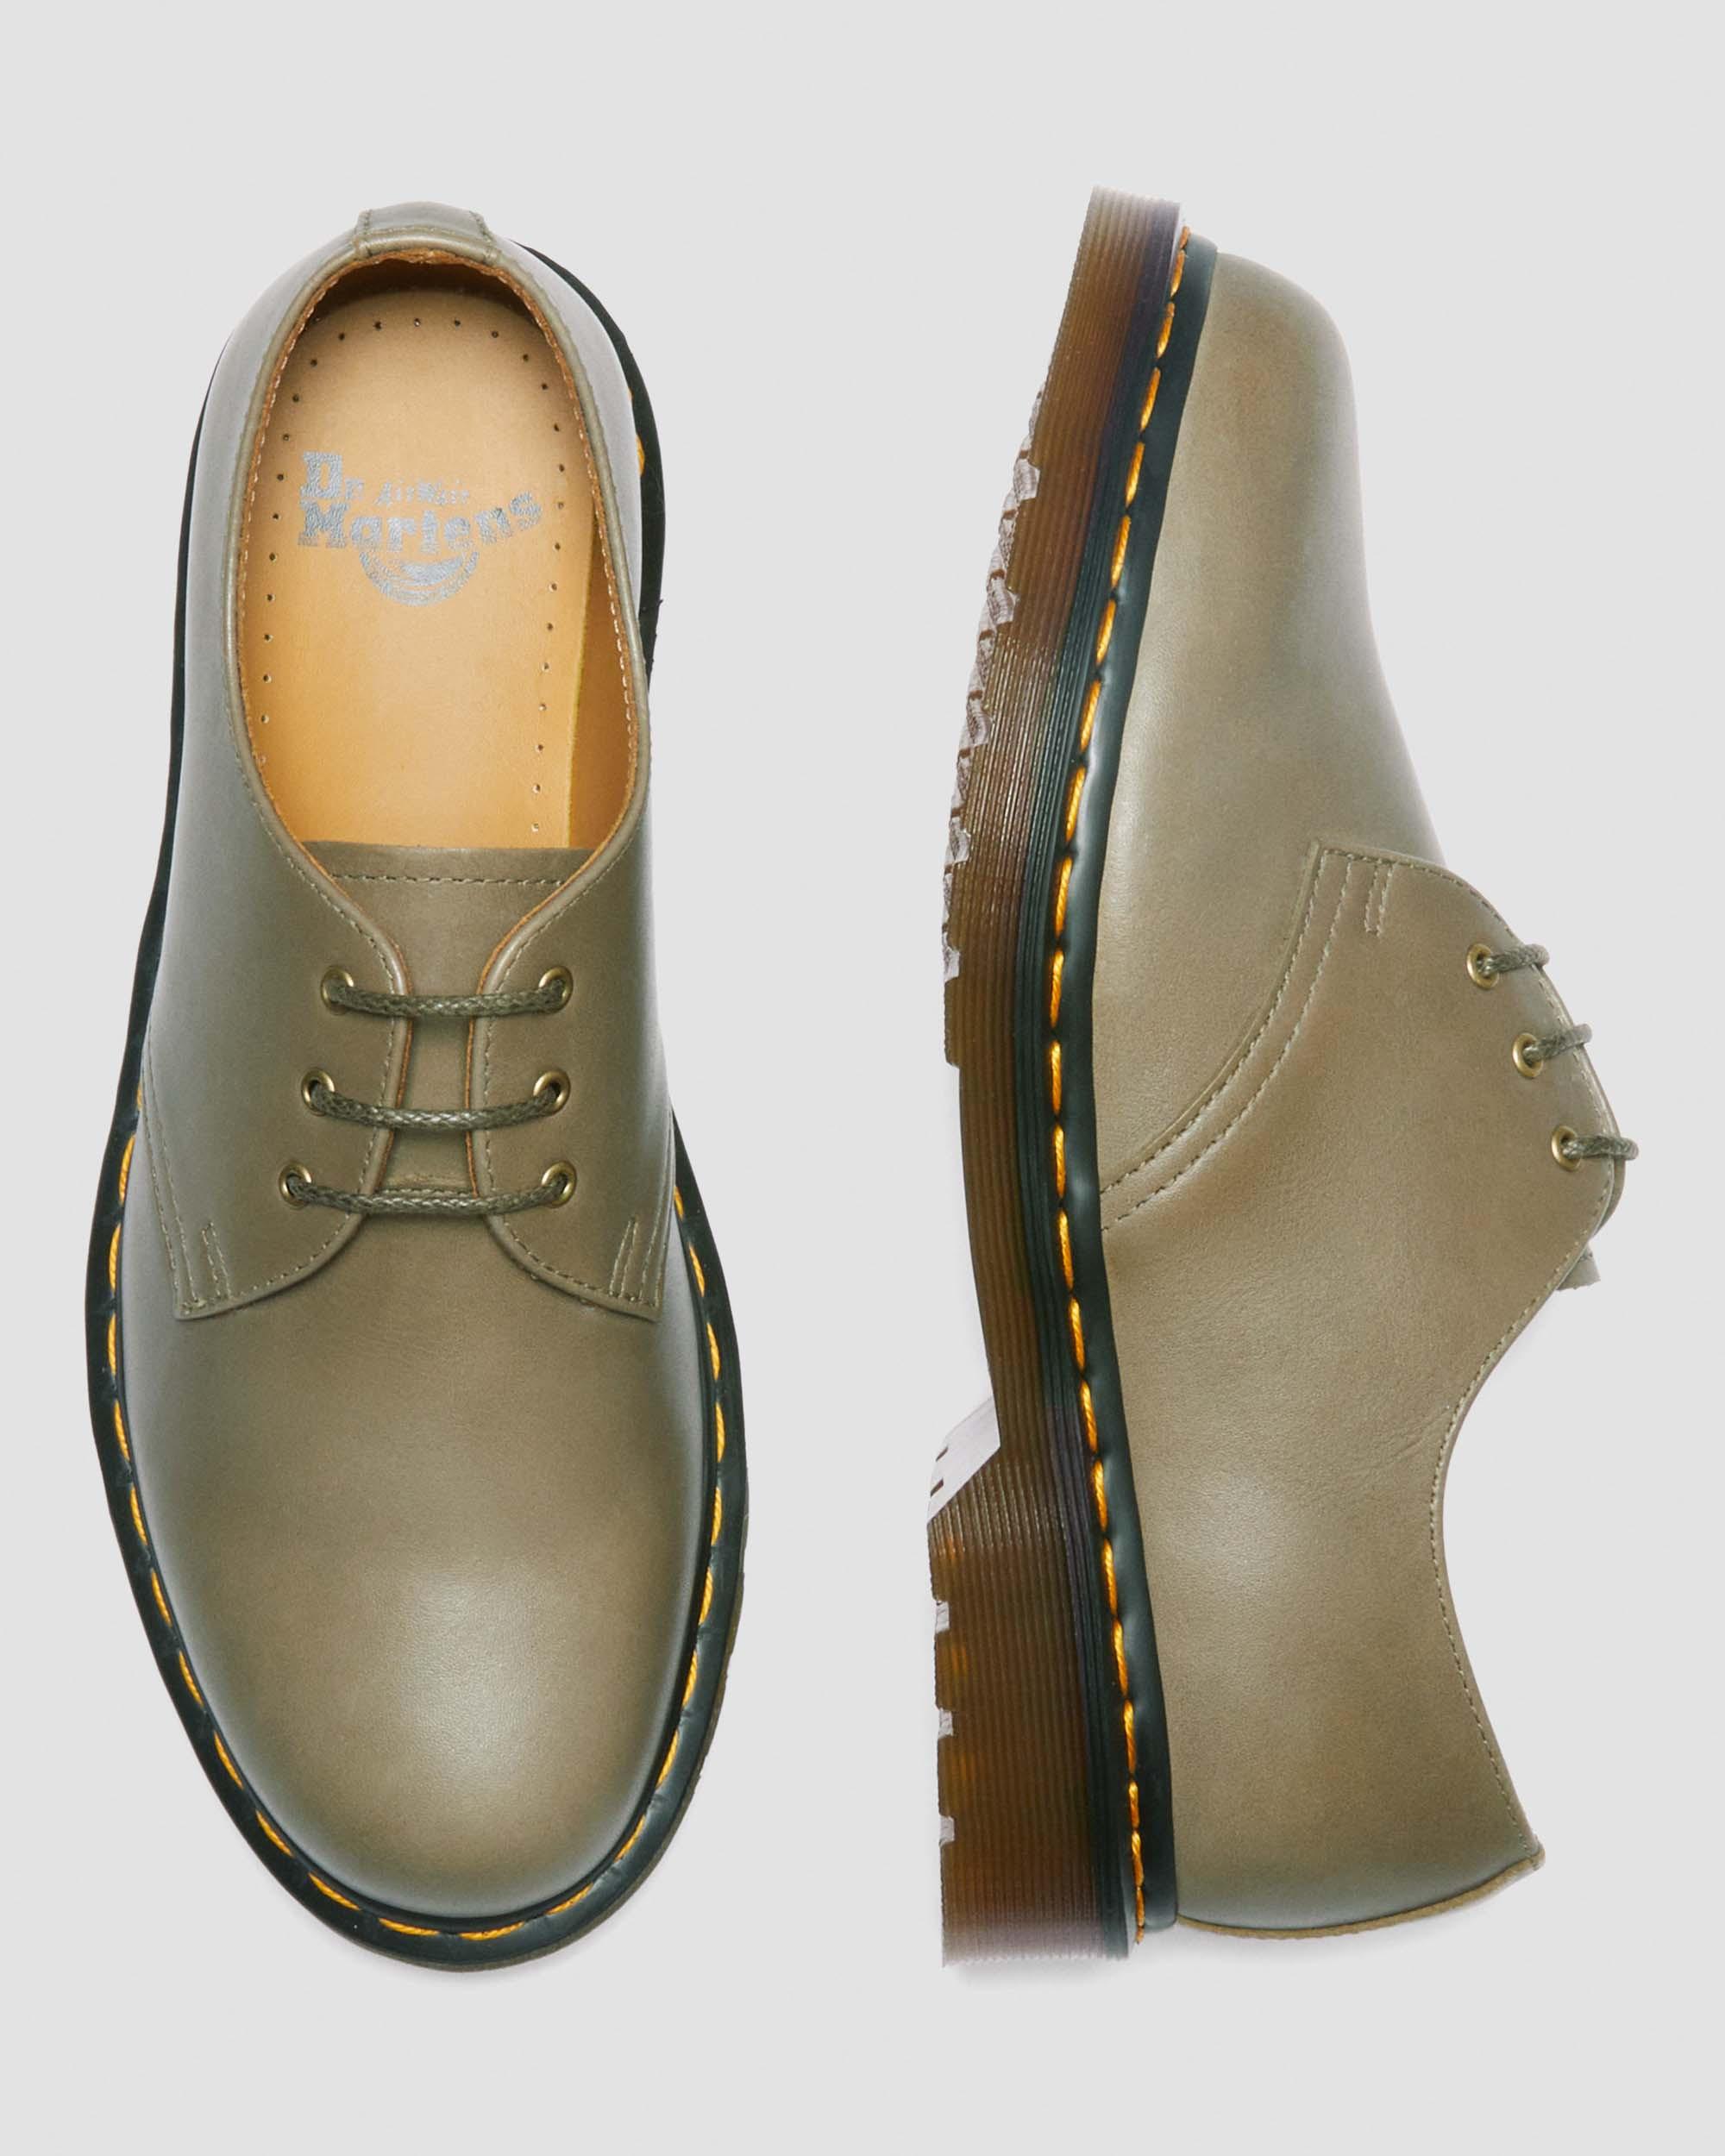 1461 Carrara Leather Oxford Shoes in Olive | Dr. Martens